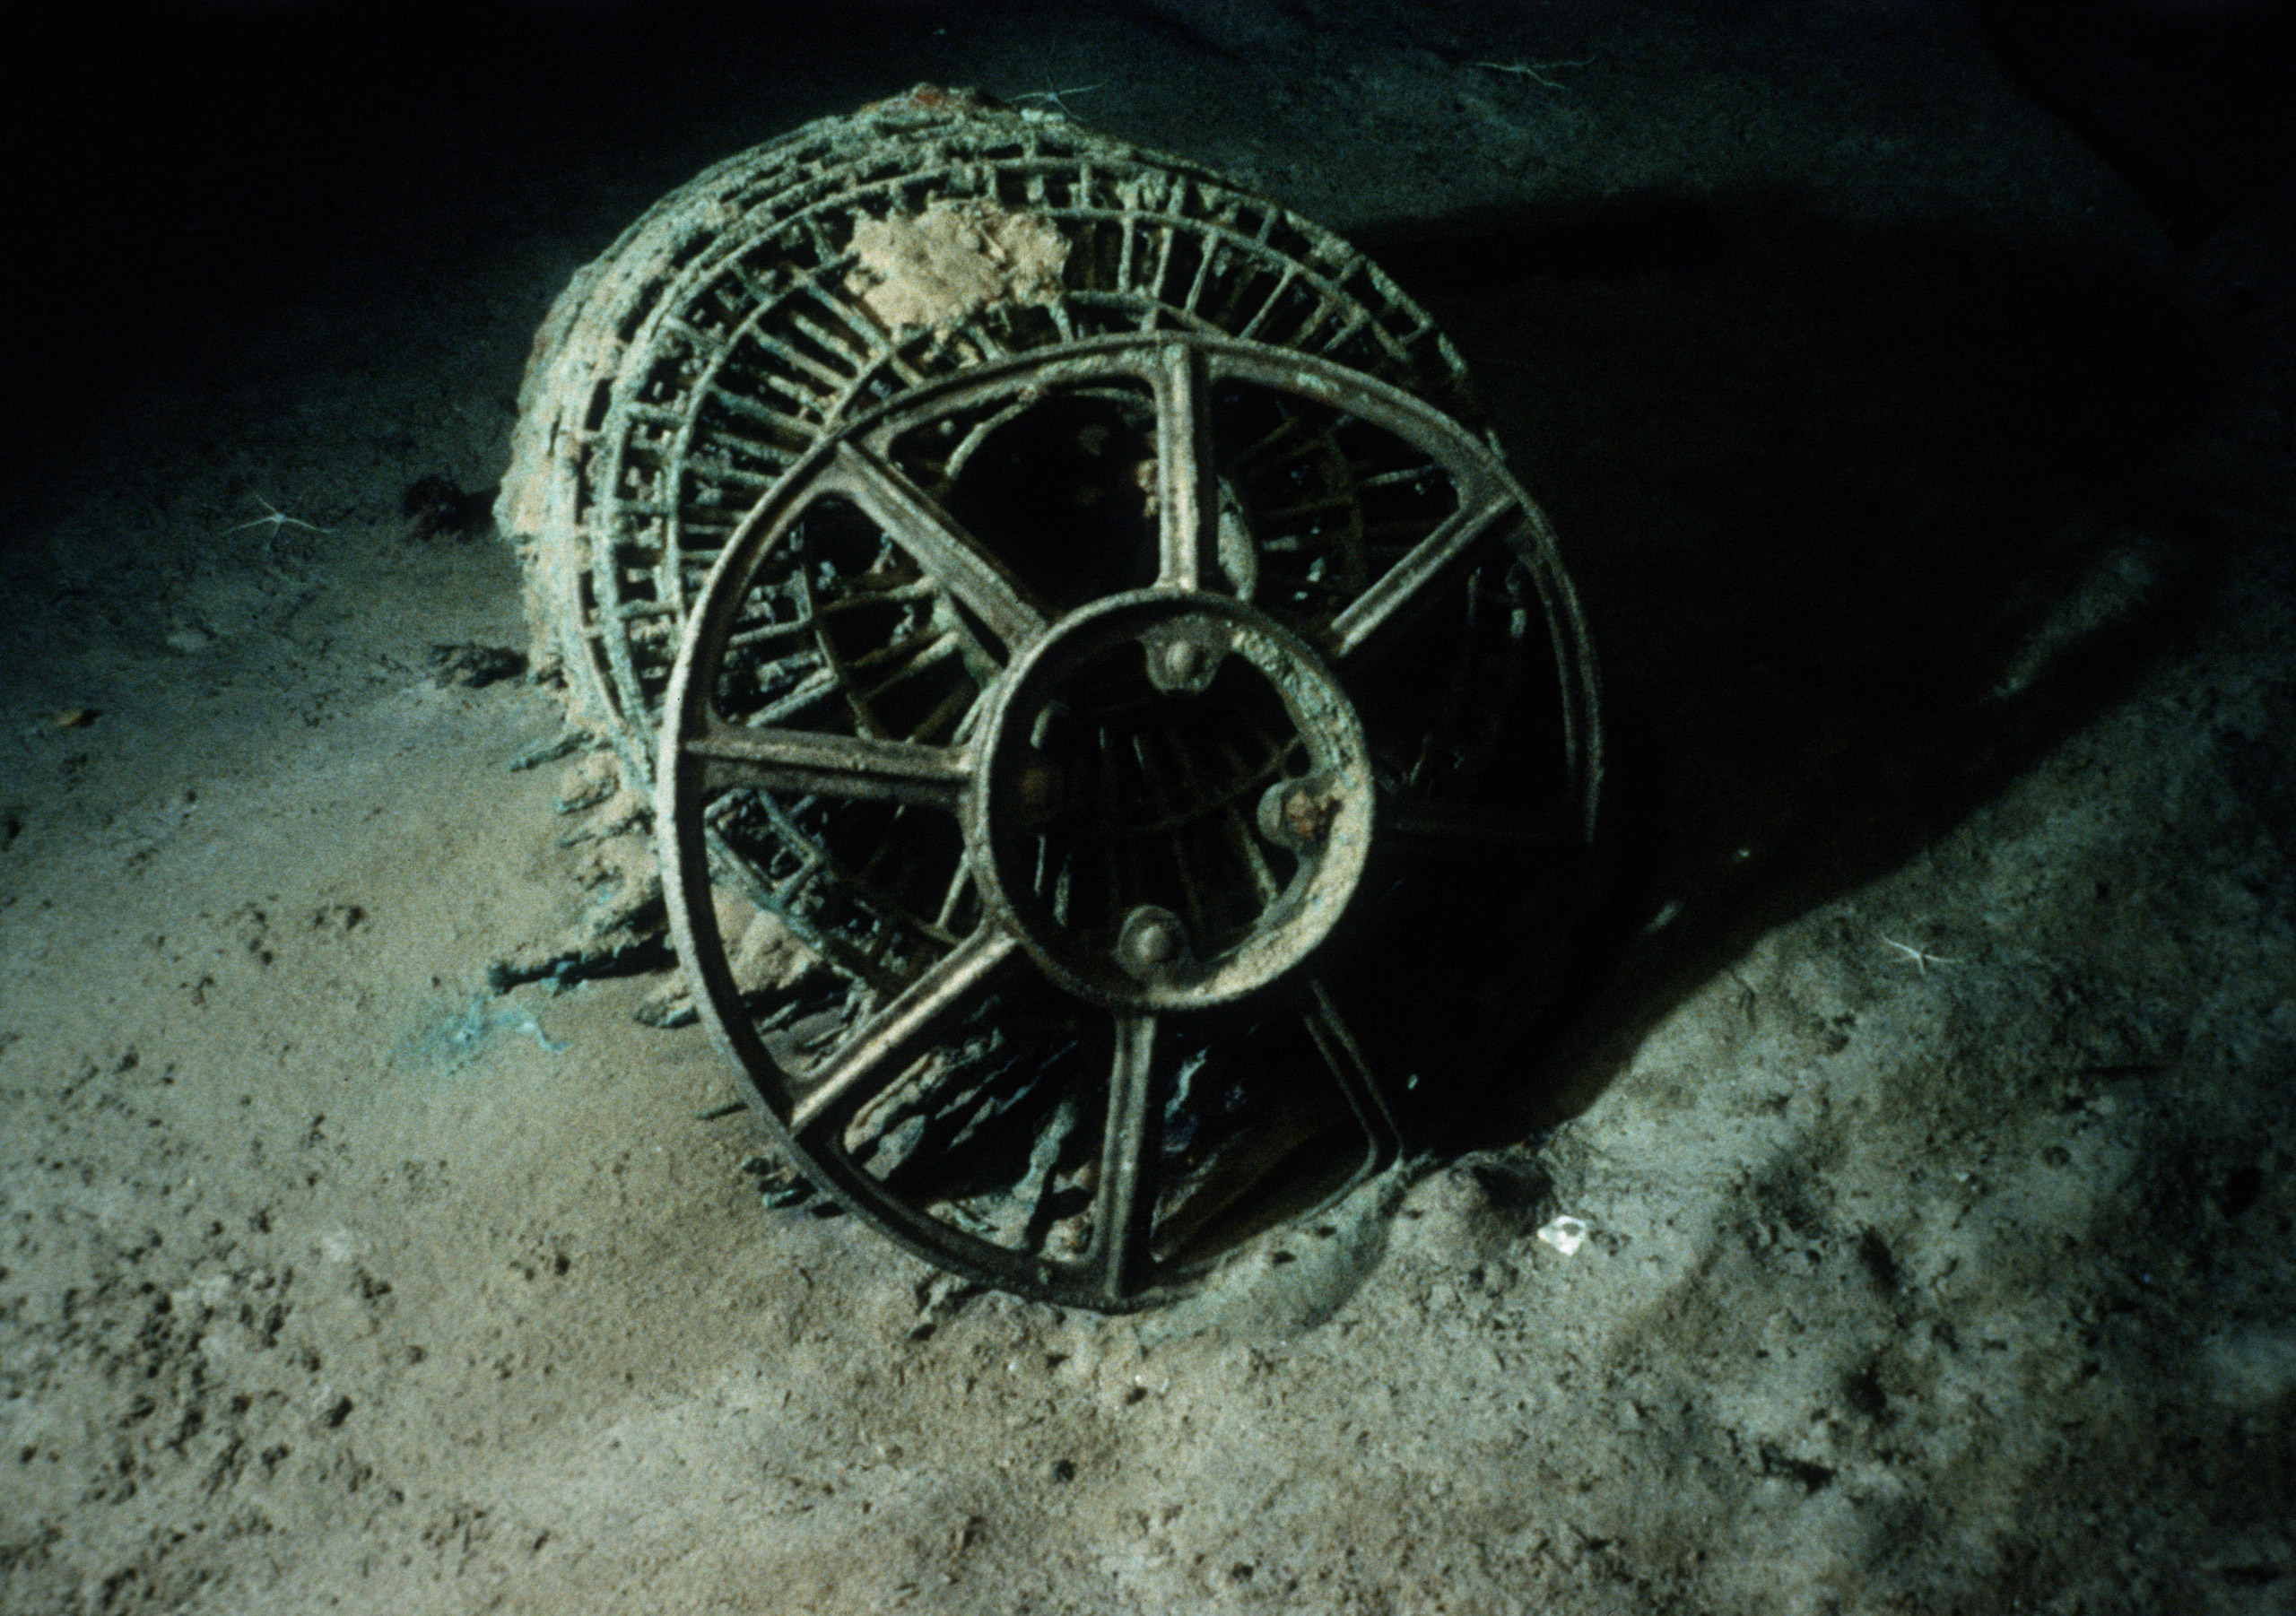 ca. 1985 --- The insides of a power turbine of the Titanic lie on the Atlantic Ocean floor south of Newfoundland.